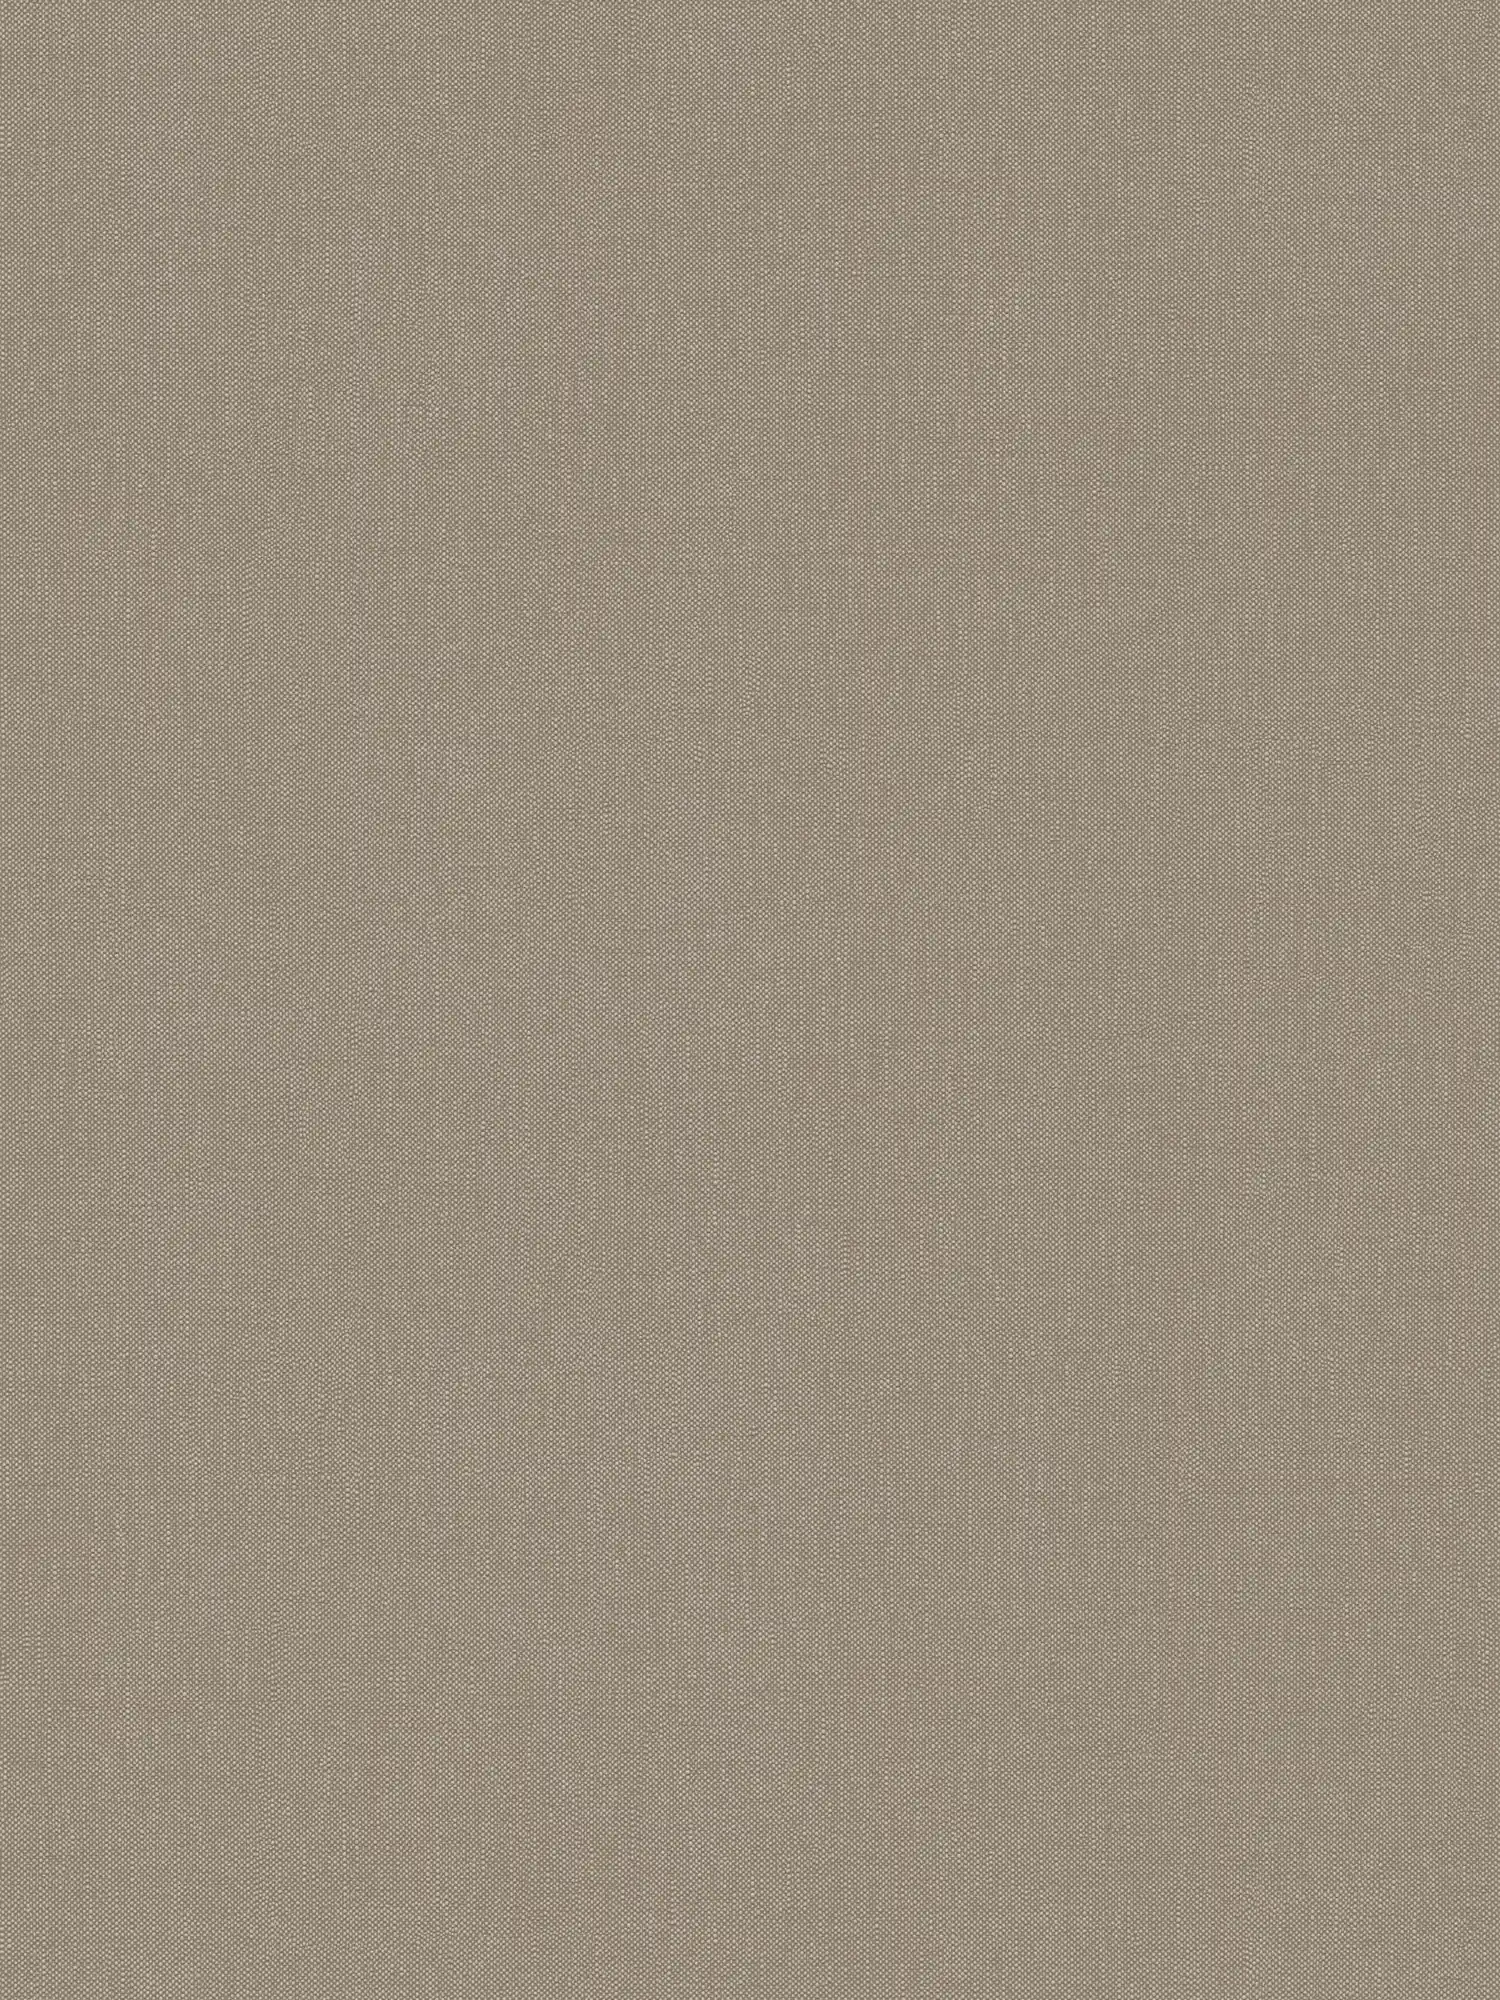 Plain wallpaper with fine structure - brown
